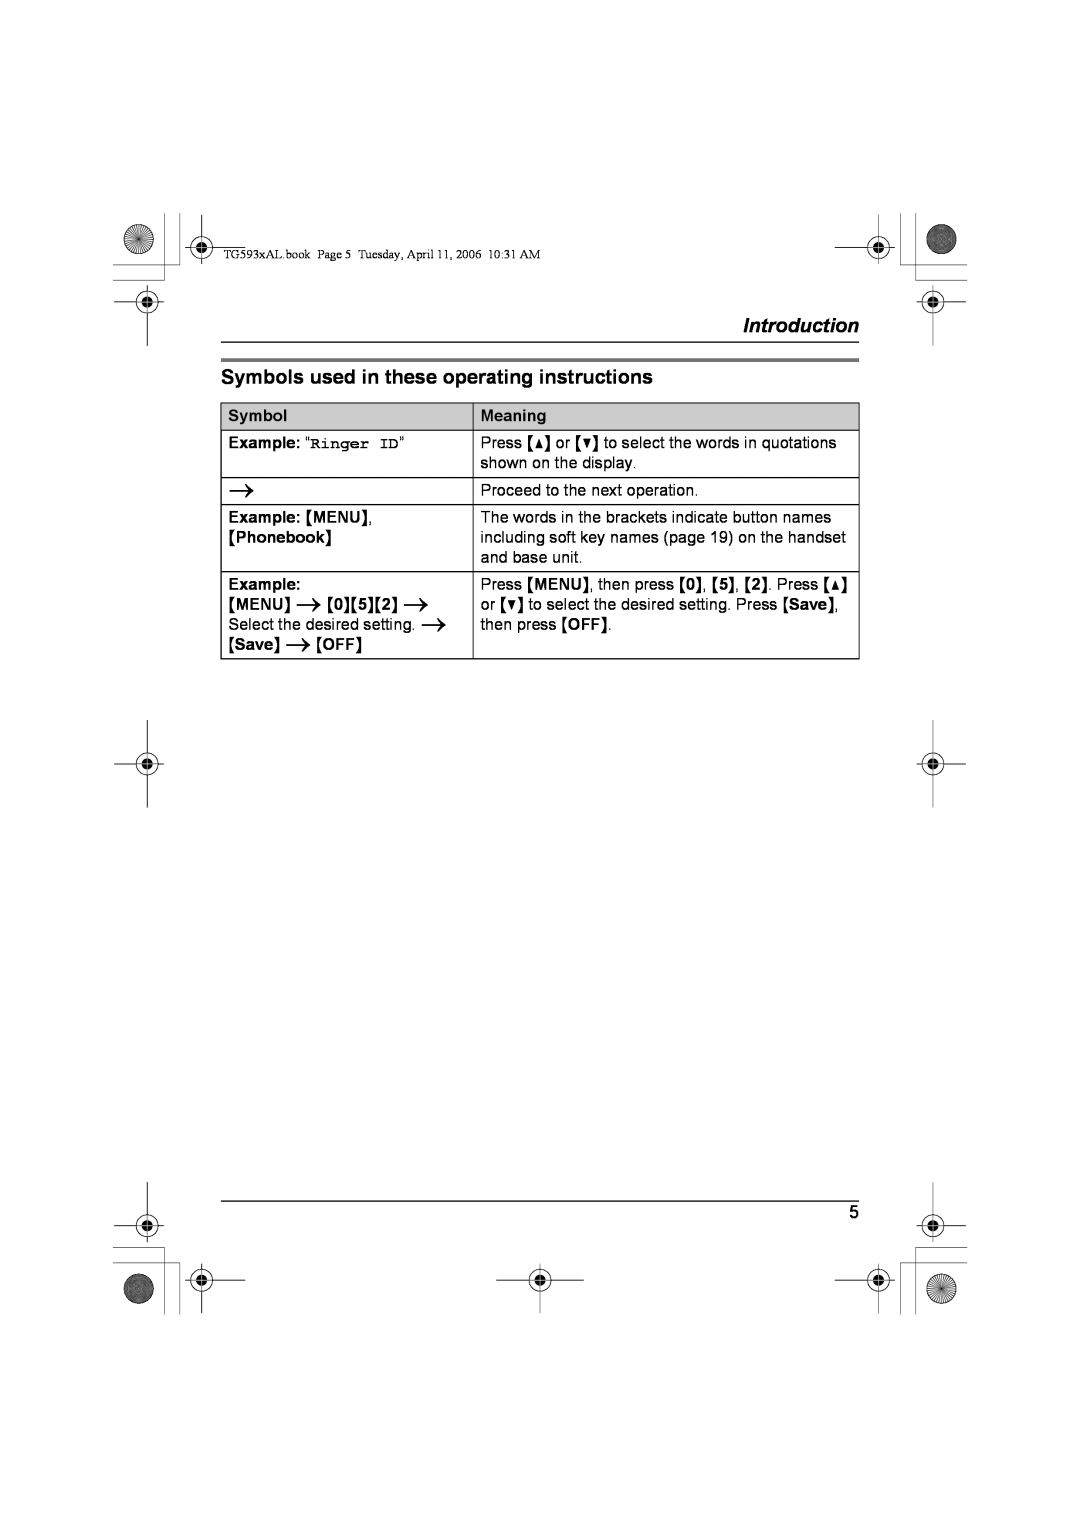 Panasonic KX-TG5932AL Introduction, Symbols used in these operating instructions, Meaning, Example “Ringer ID”, Phonebook 